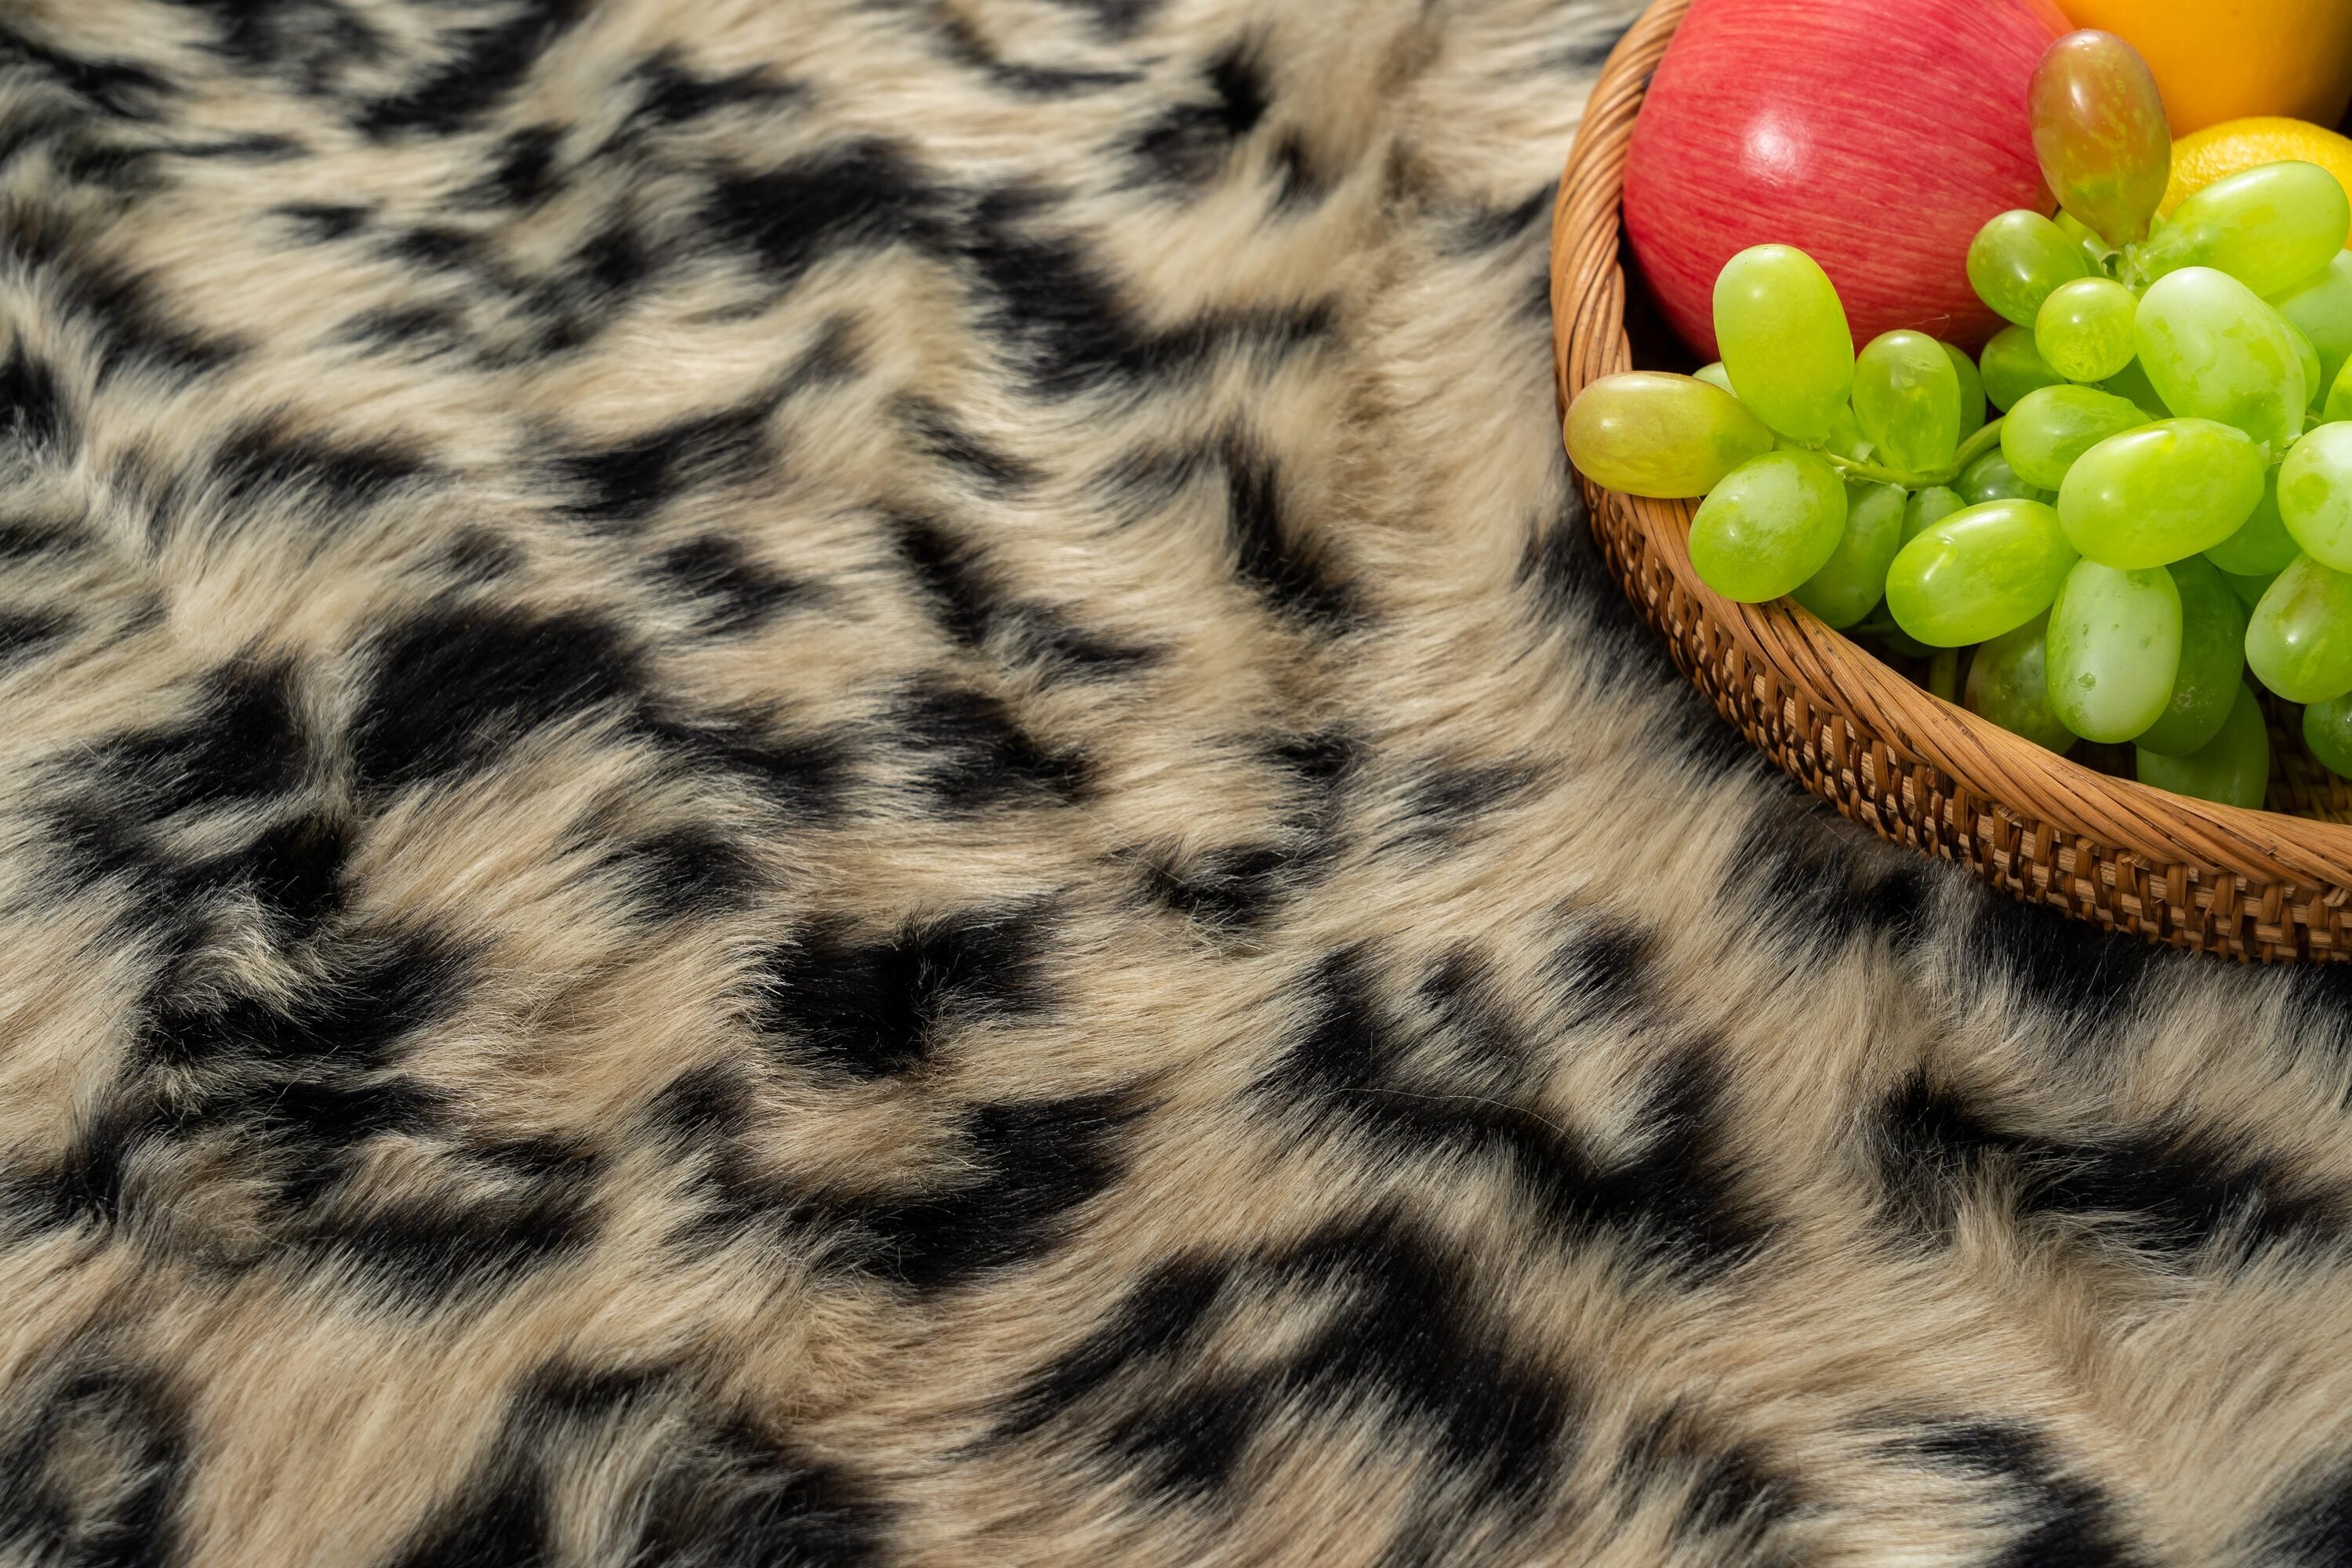 MDA Rugs Luxury Collection 5 X 7 (ft) Leopard Print Indoor Animal Print  Area Rug in the Rugs department at